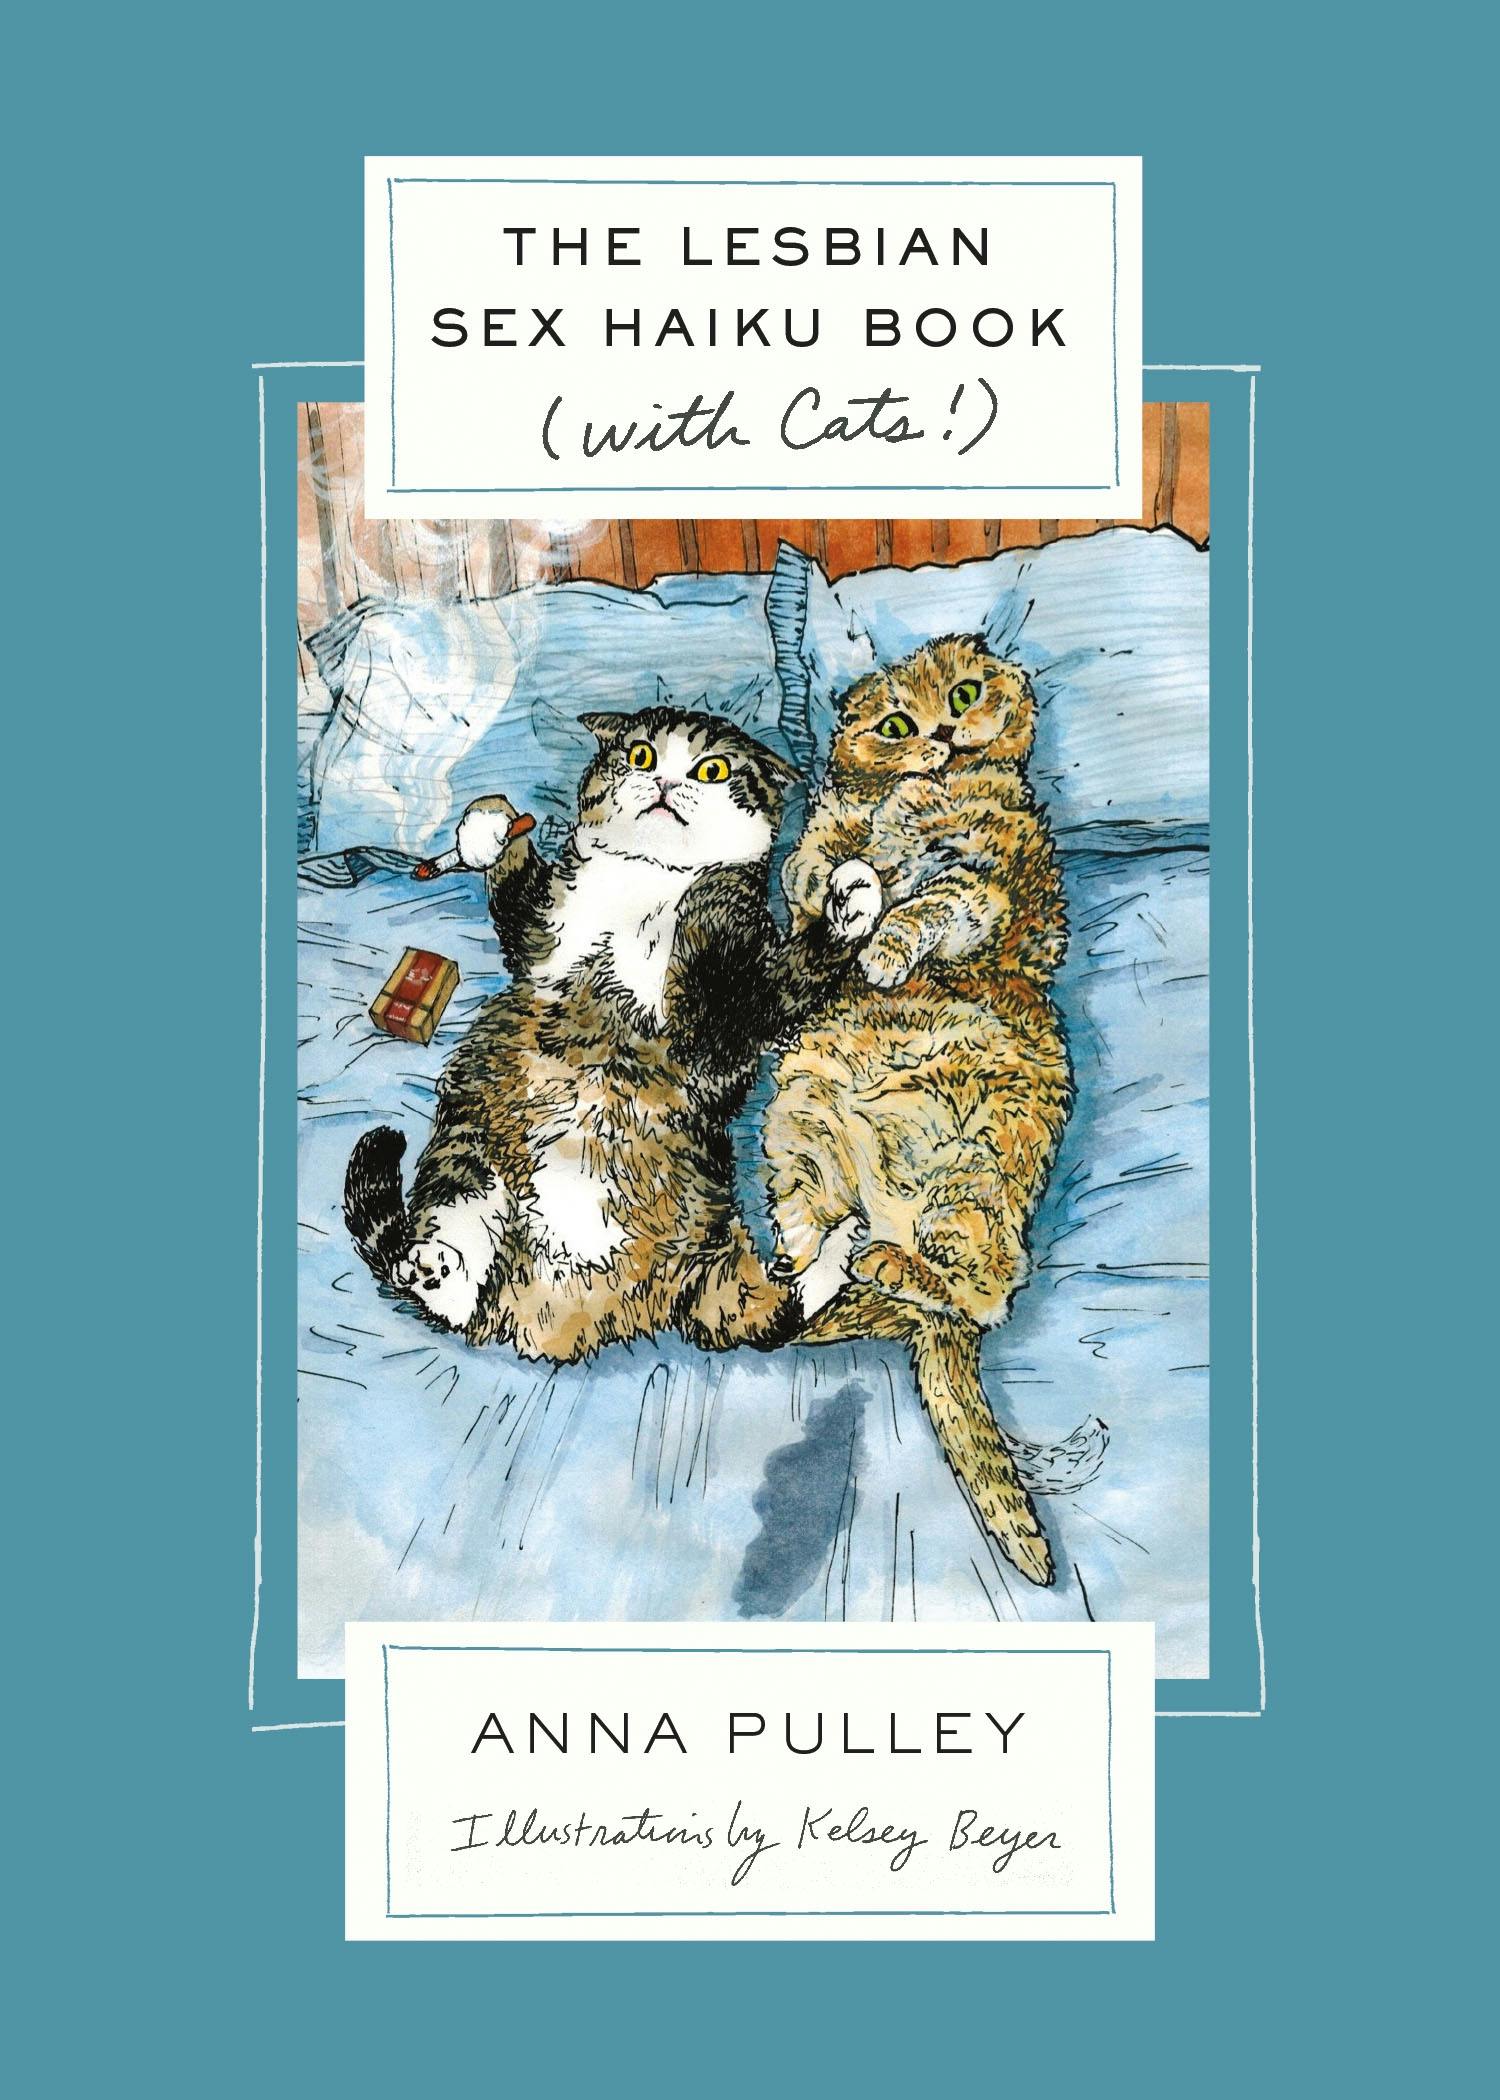 The Lesbian Sex Haiku Book (with Cats!) photo